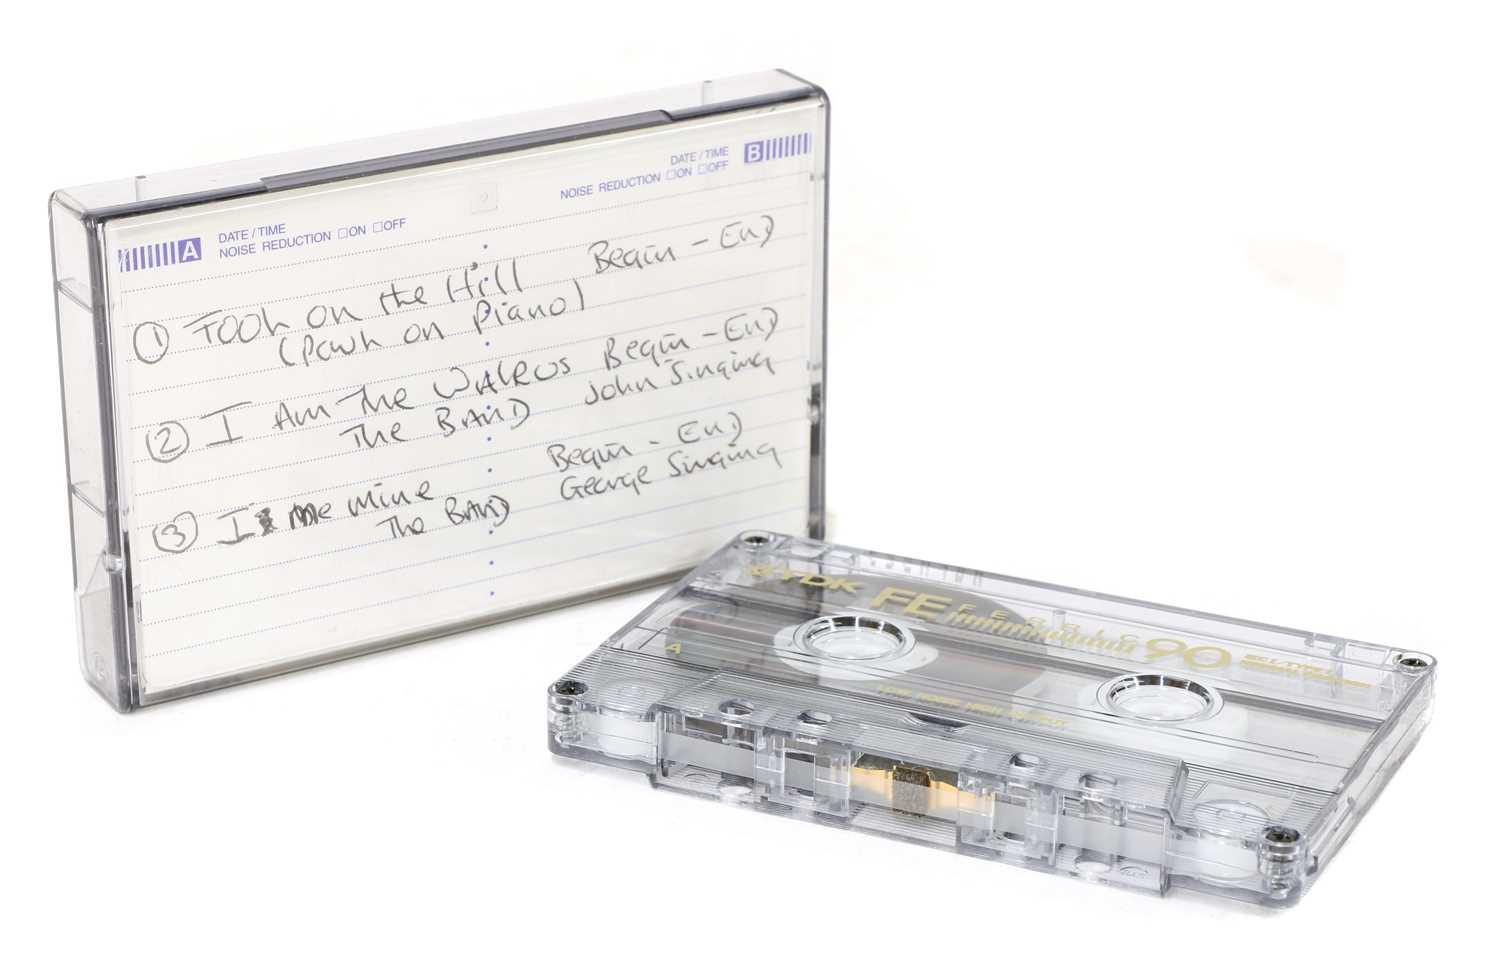 Lot 548 - The Beatles, a demo tape edit